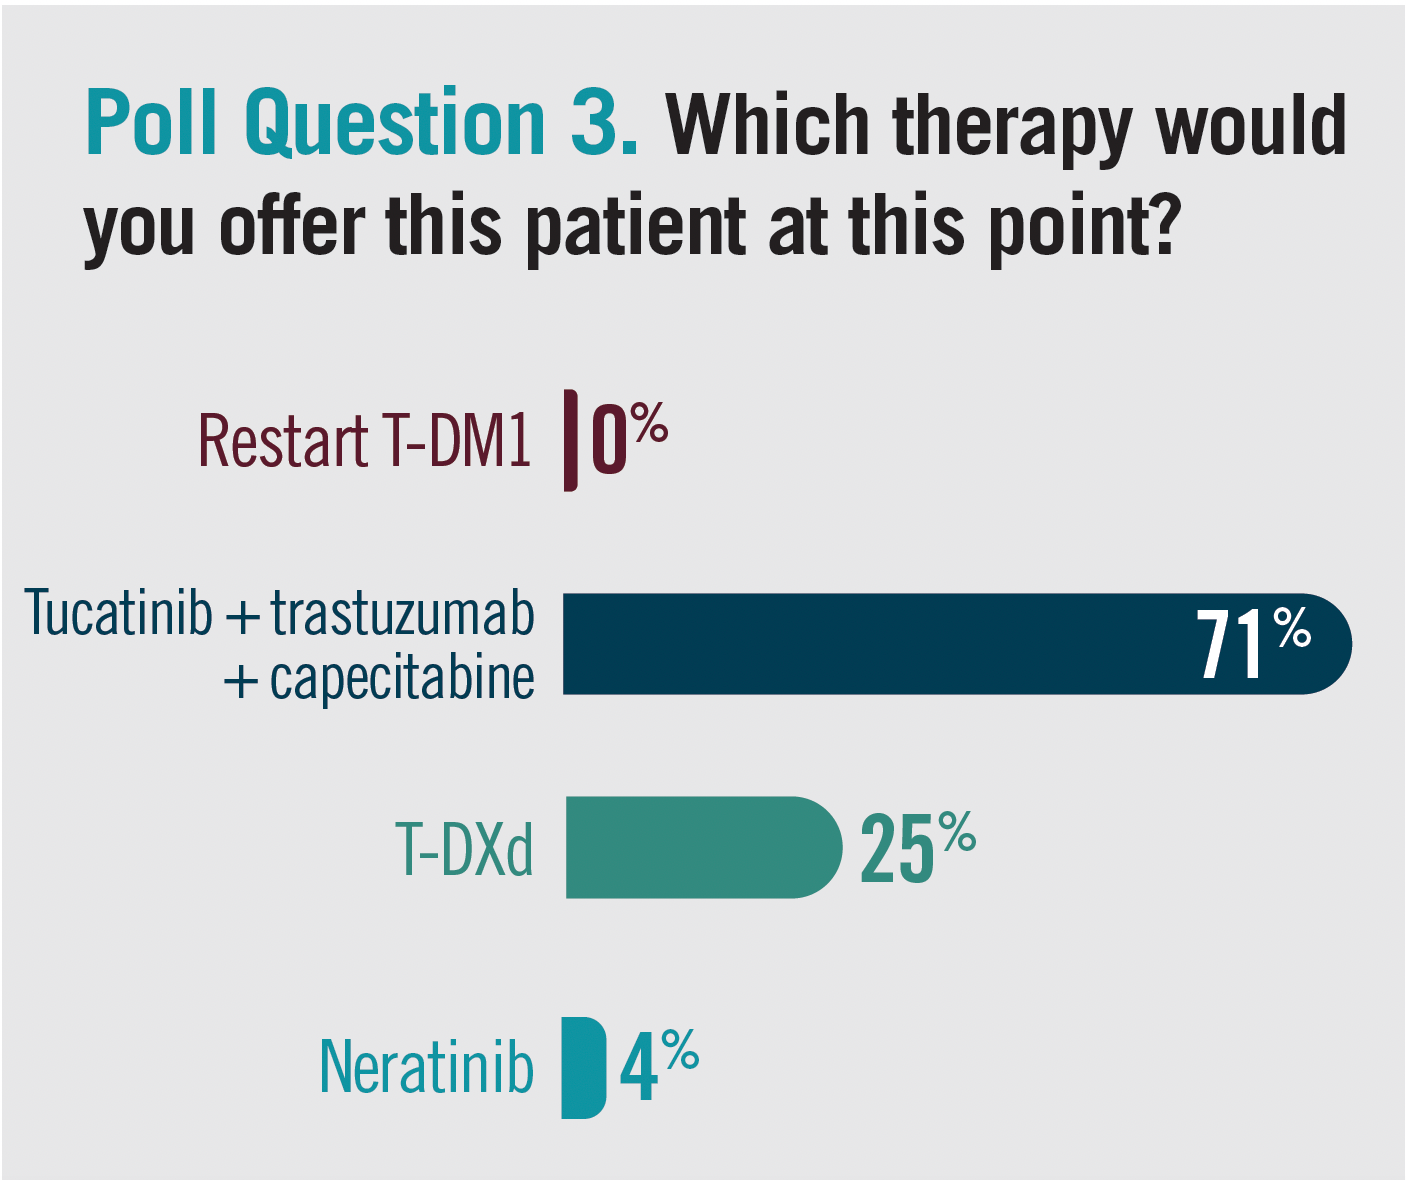 Poll Question 3. Which therapy would you offer this patient at this point?